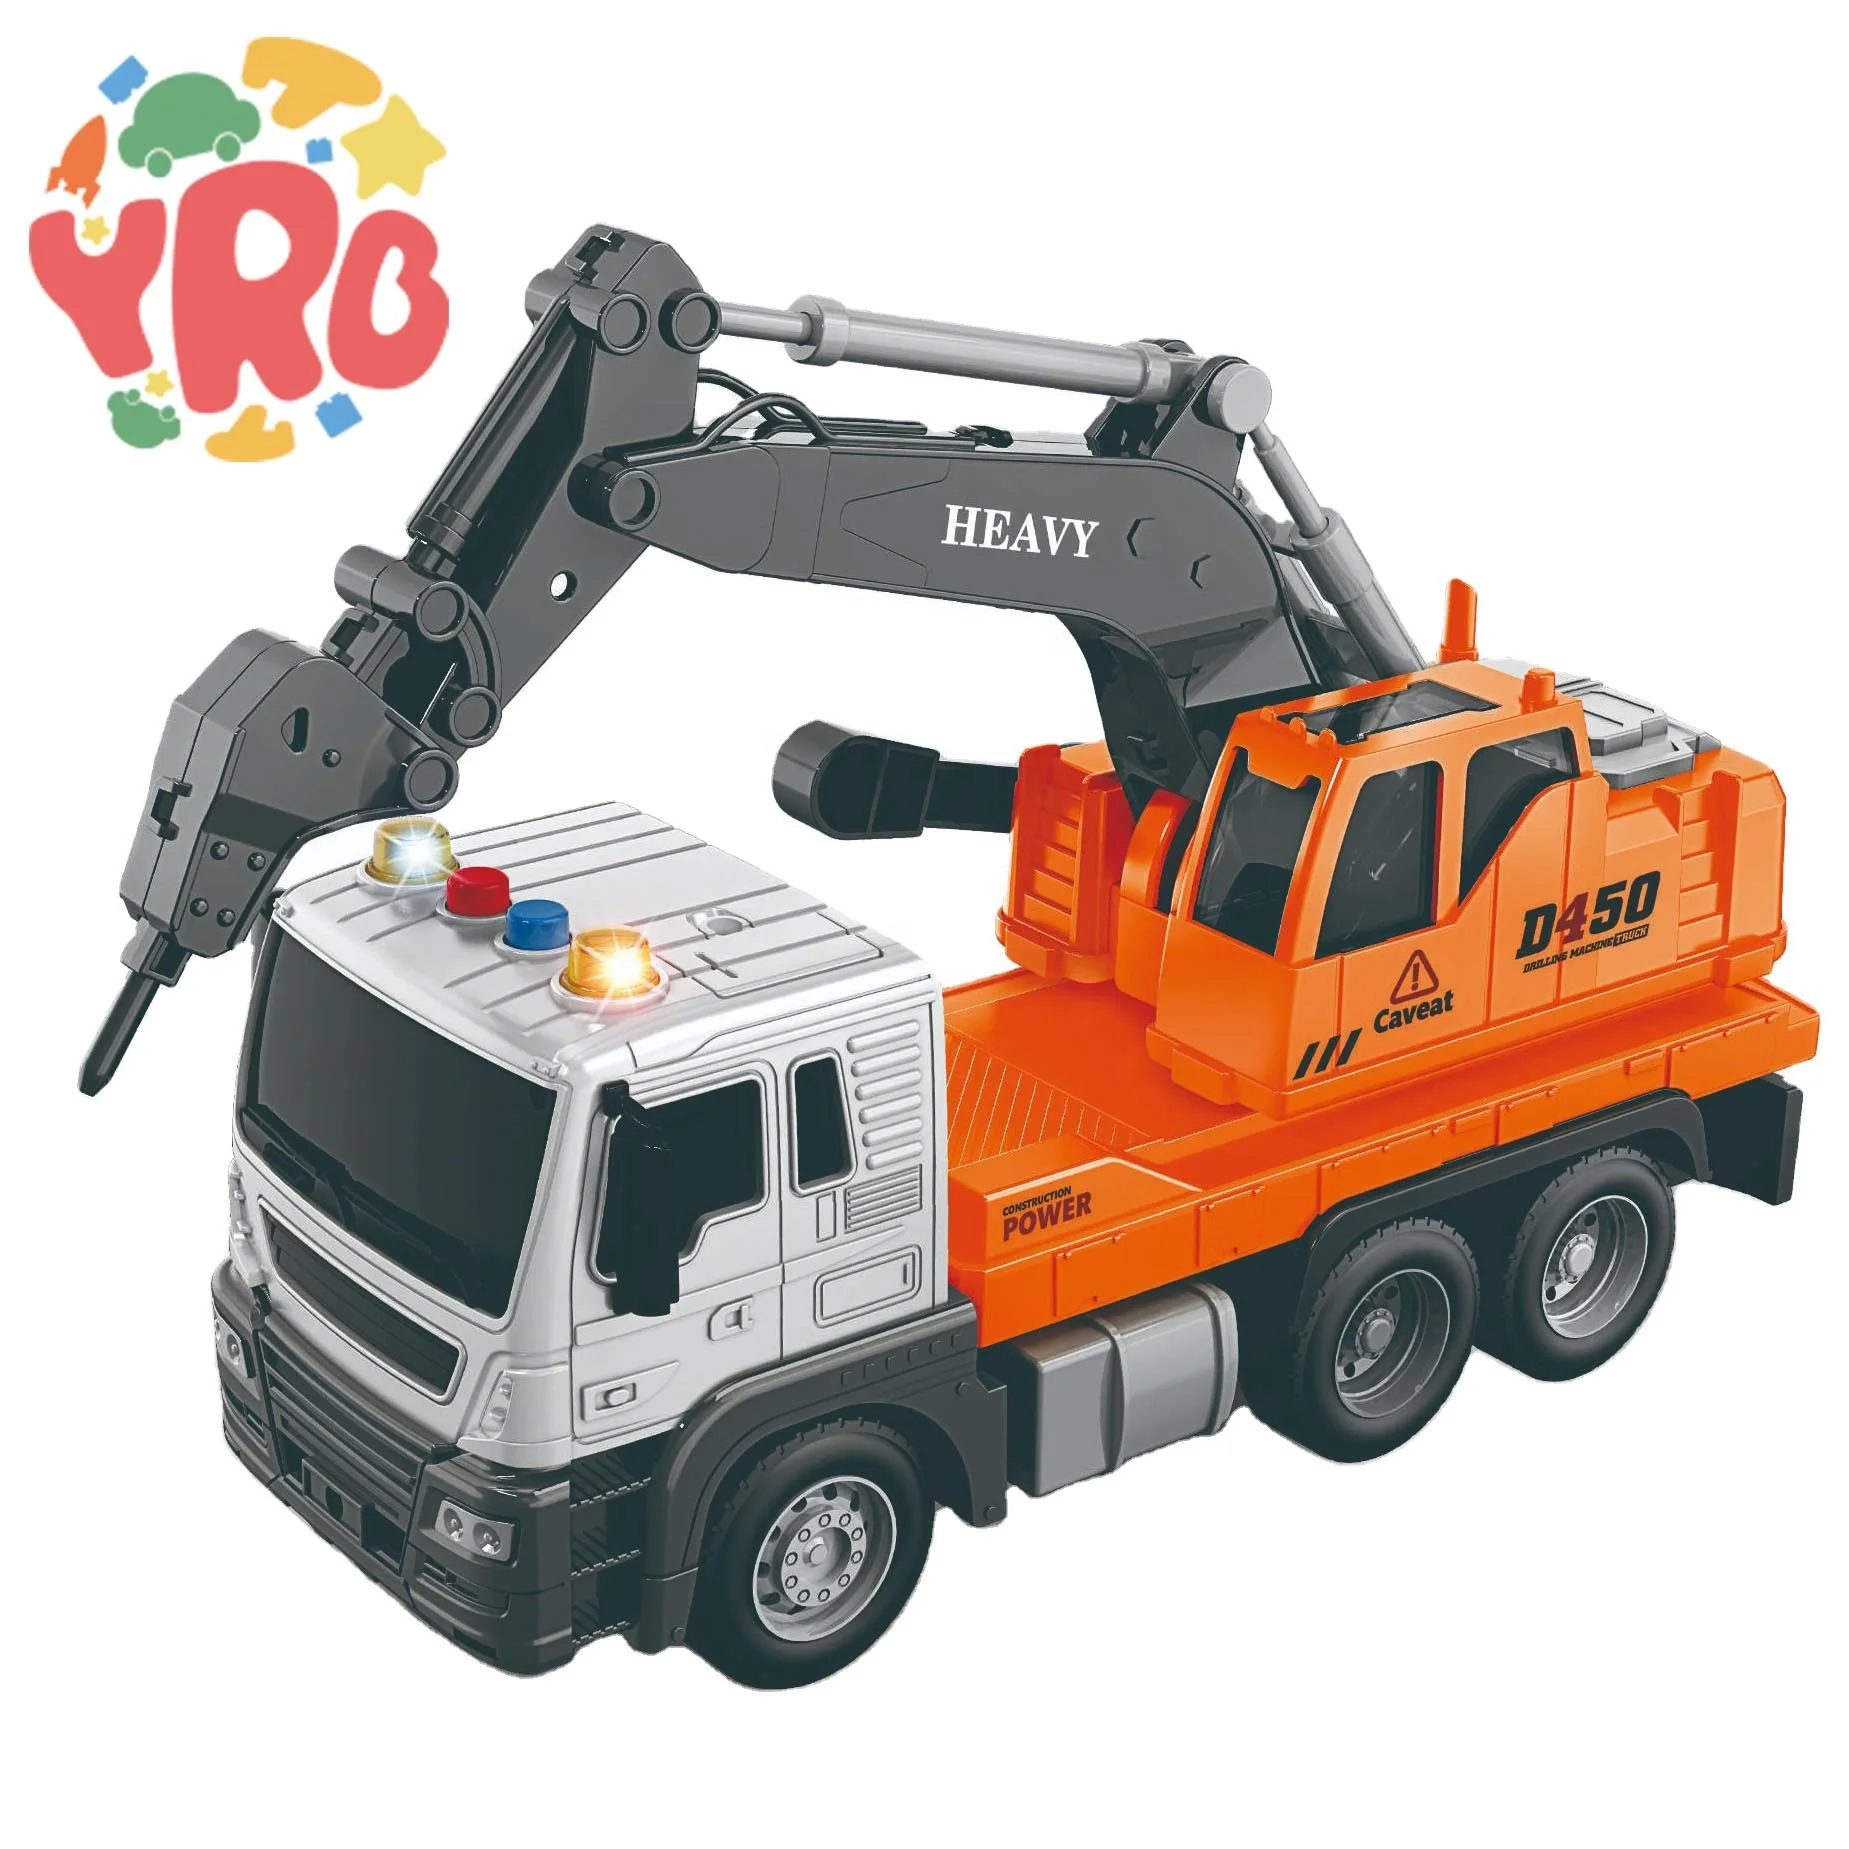 

Cheap Diecast Toys Vehicles Model Metal Truck Die Cast Car Toy For Boys Education inertia ground drilling vehicle toy